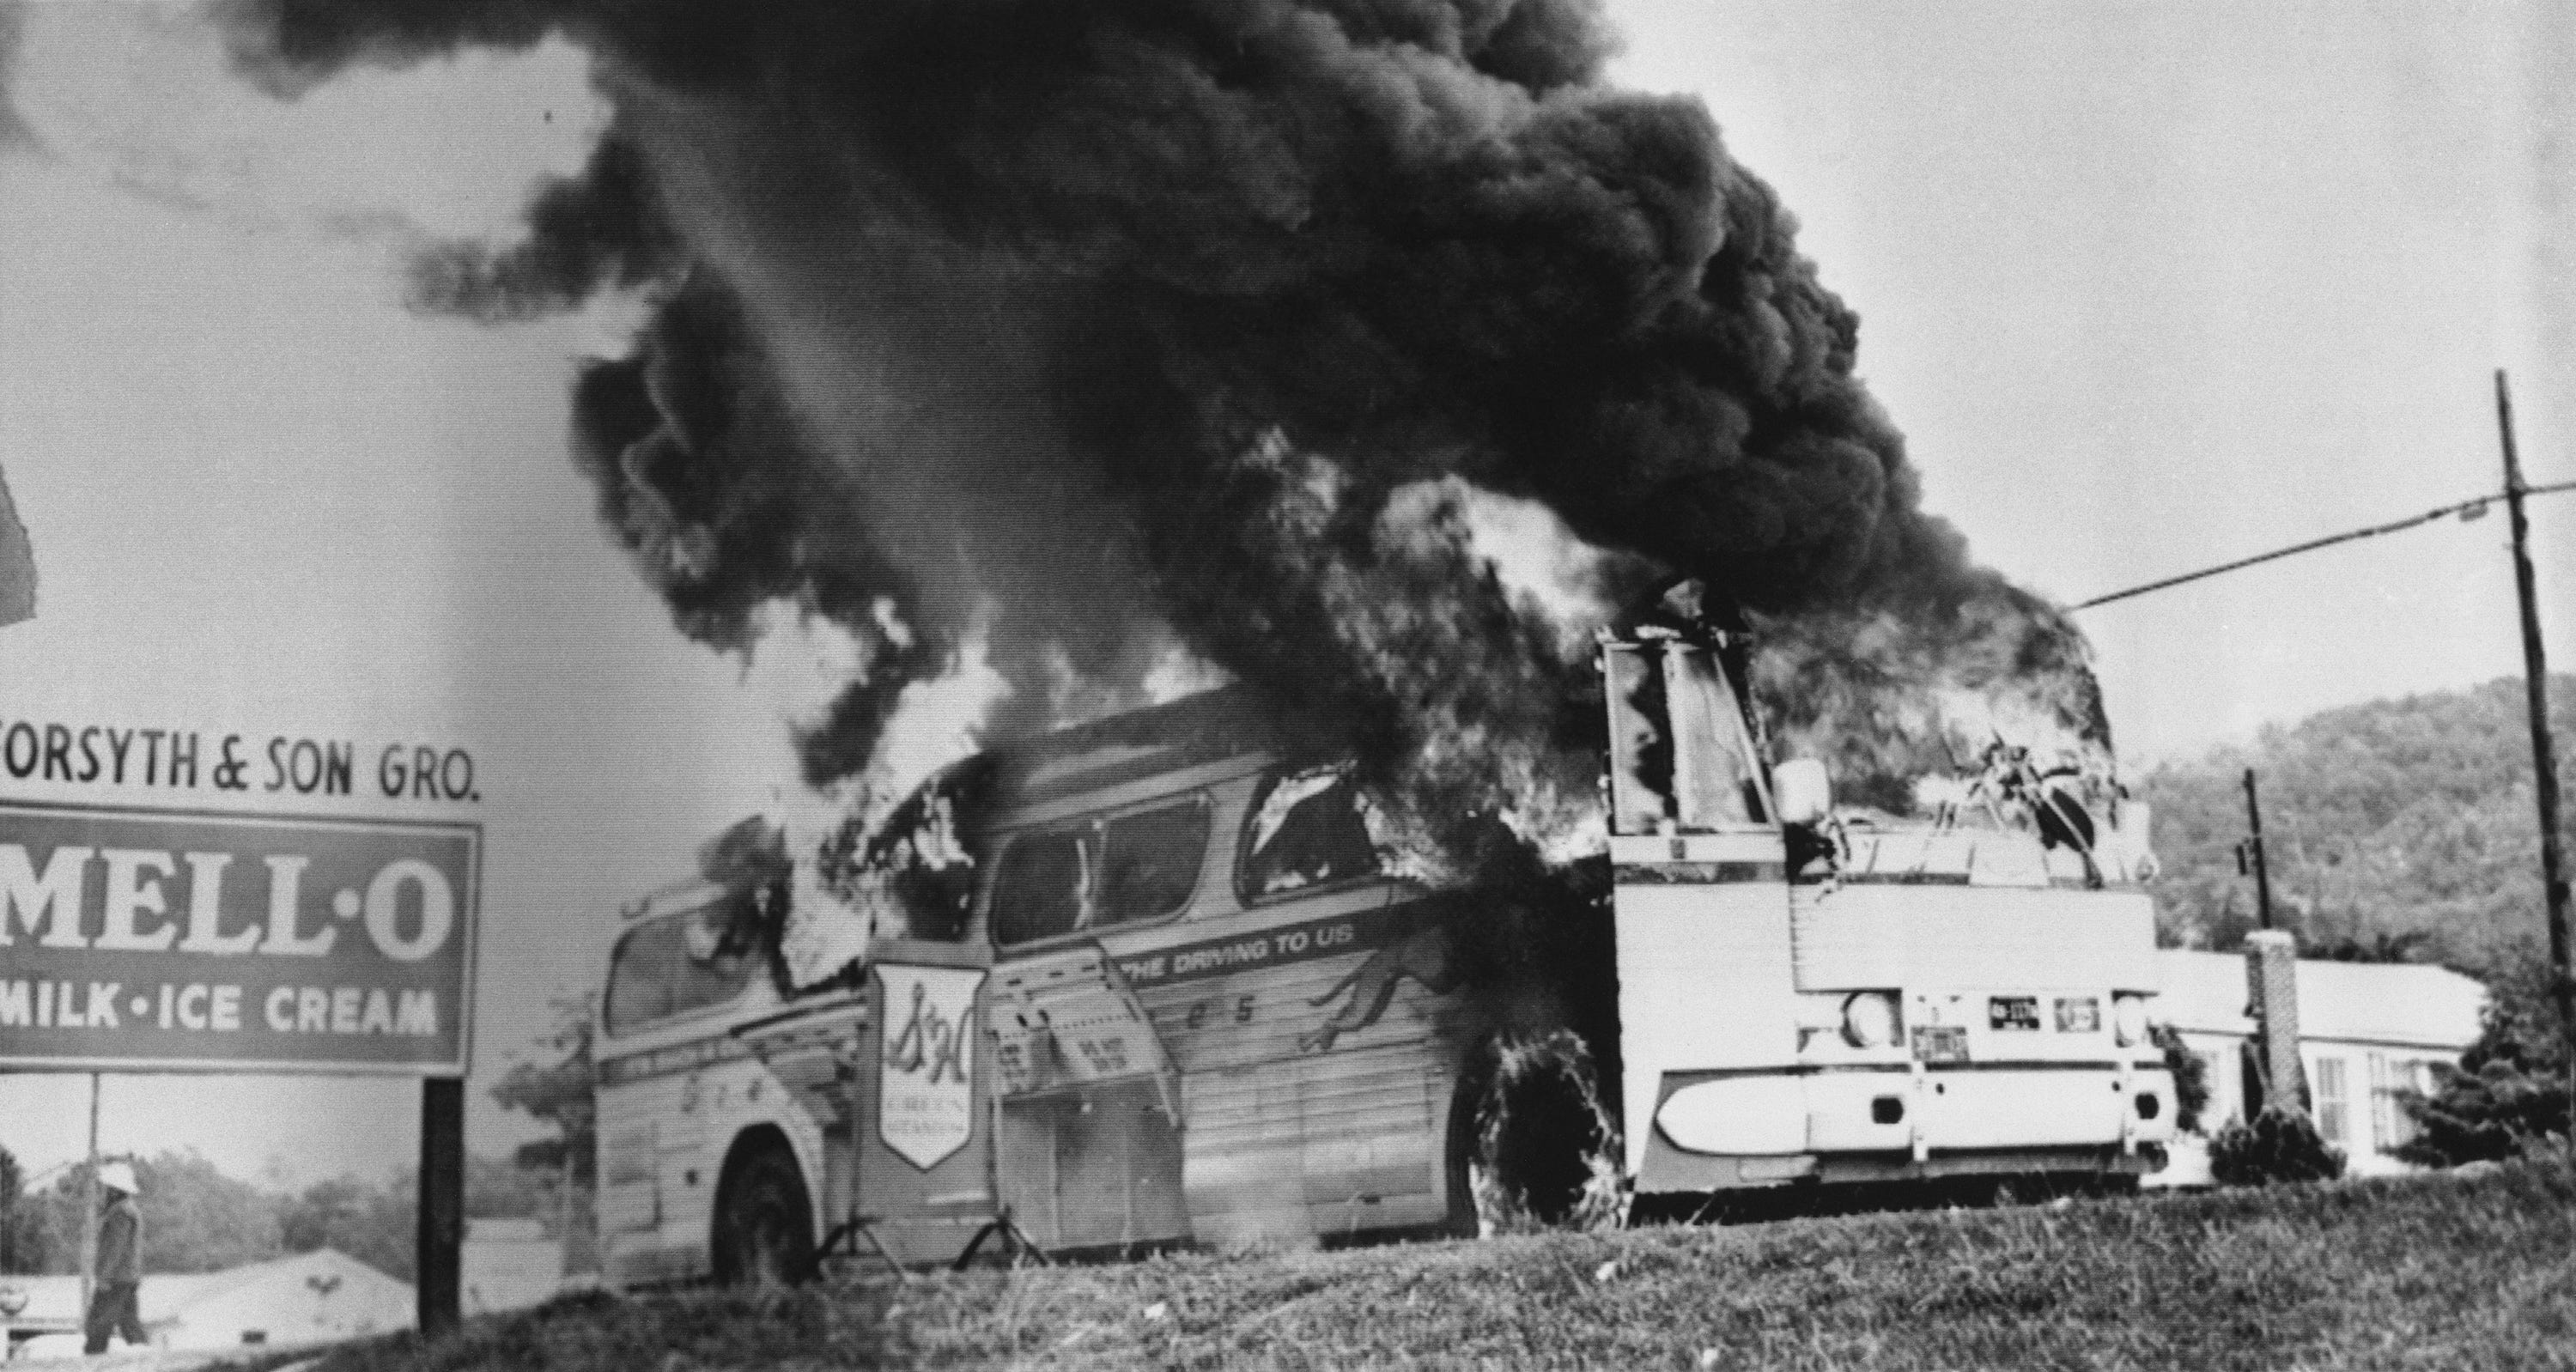 A Freedom Rider bus went up in flames when a firebomb was tossed through a broken window near Anniston, Ala., May 14, 1961. The bus, which was testing bus station segregation in the South, had stopped due to flat tires inflicted by a white mob at the Anniston bus station. Passengers escaped without serious injury, but endured beatings by a white mob that followed the bus as it left Anniston.